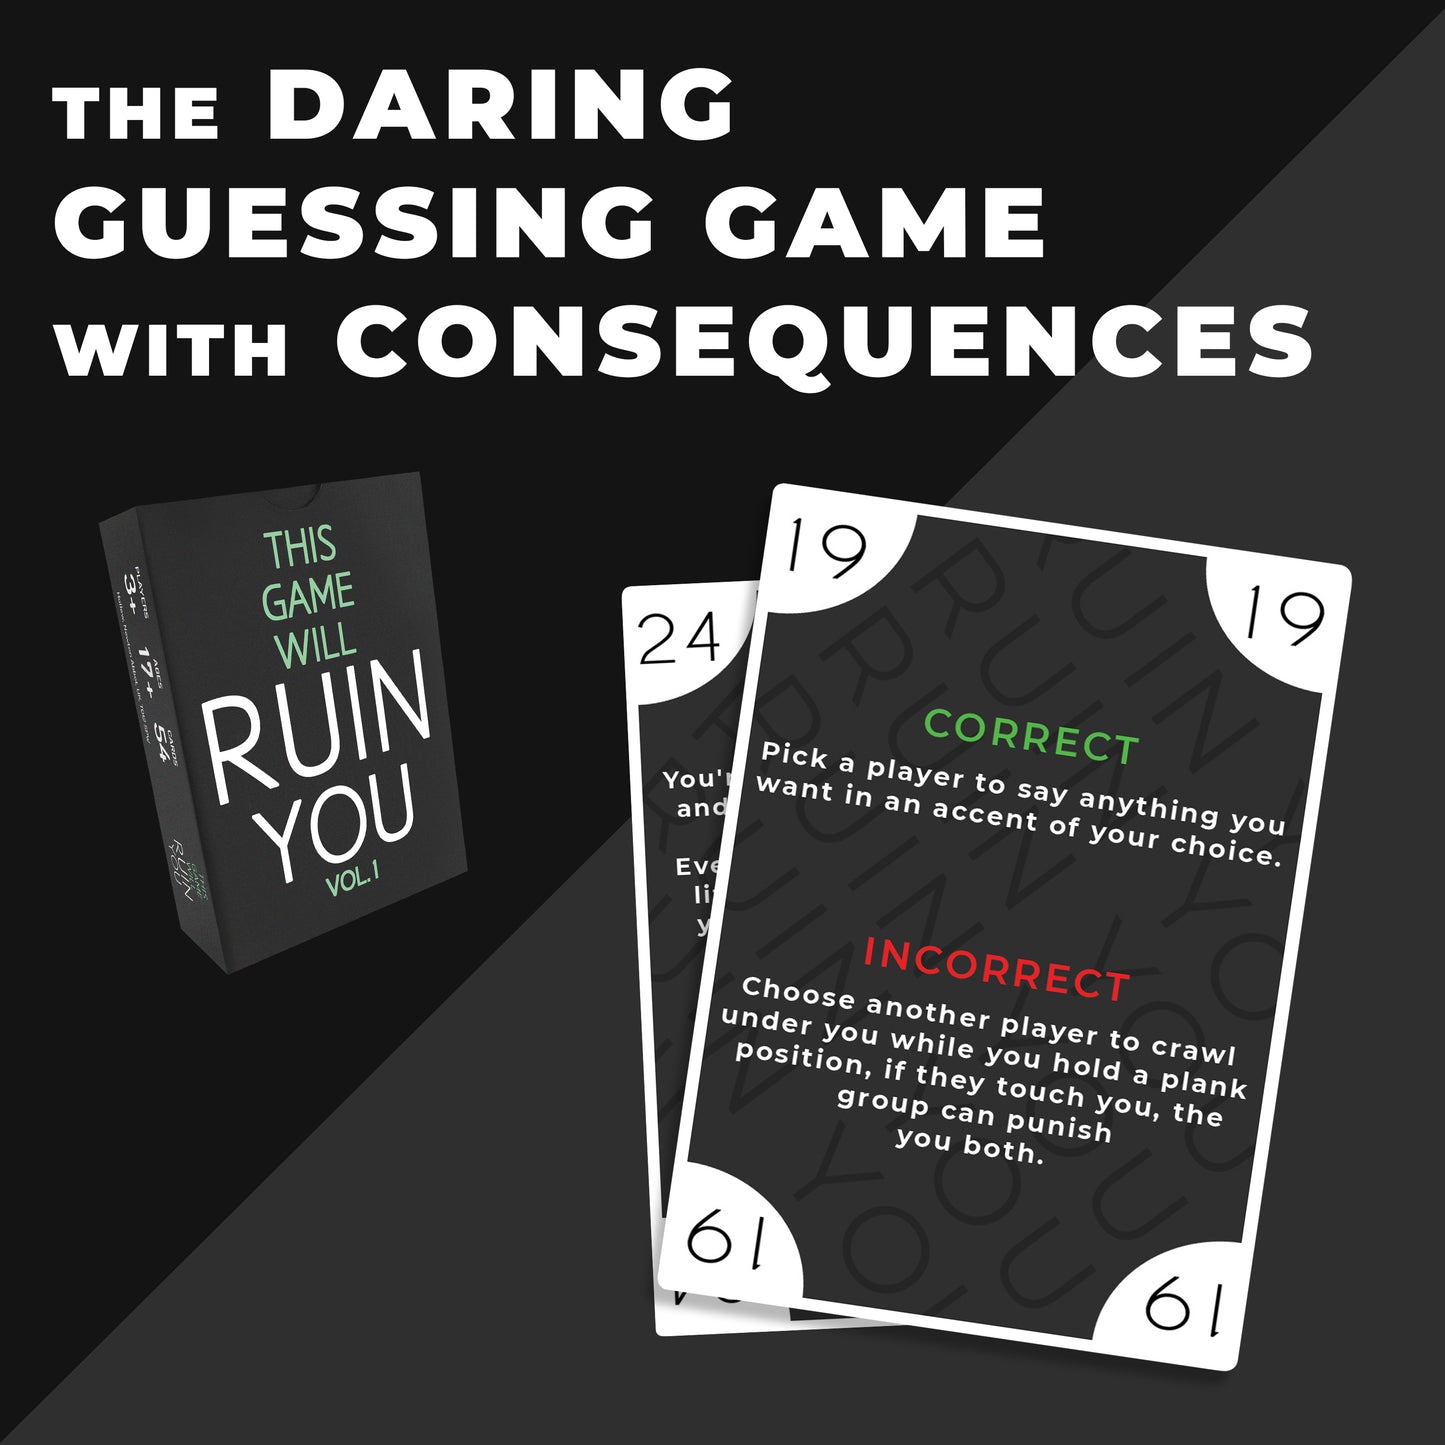 This Game Will Ruin You Vol 1 - Card Games for Adults & Hen Parties - Party Games for Uni Students & Fun Adult Games- Board Games for Groups & Couples or 18th Birthday Gift Visit the Hollew Store